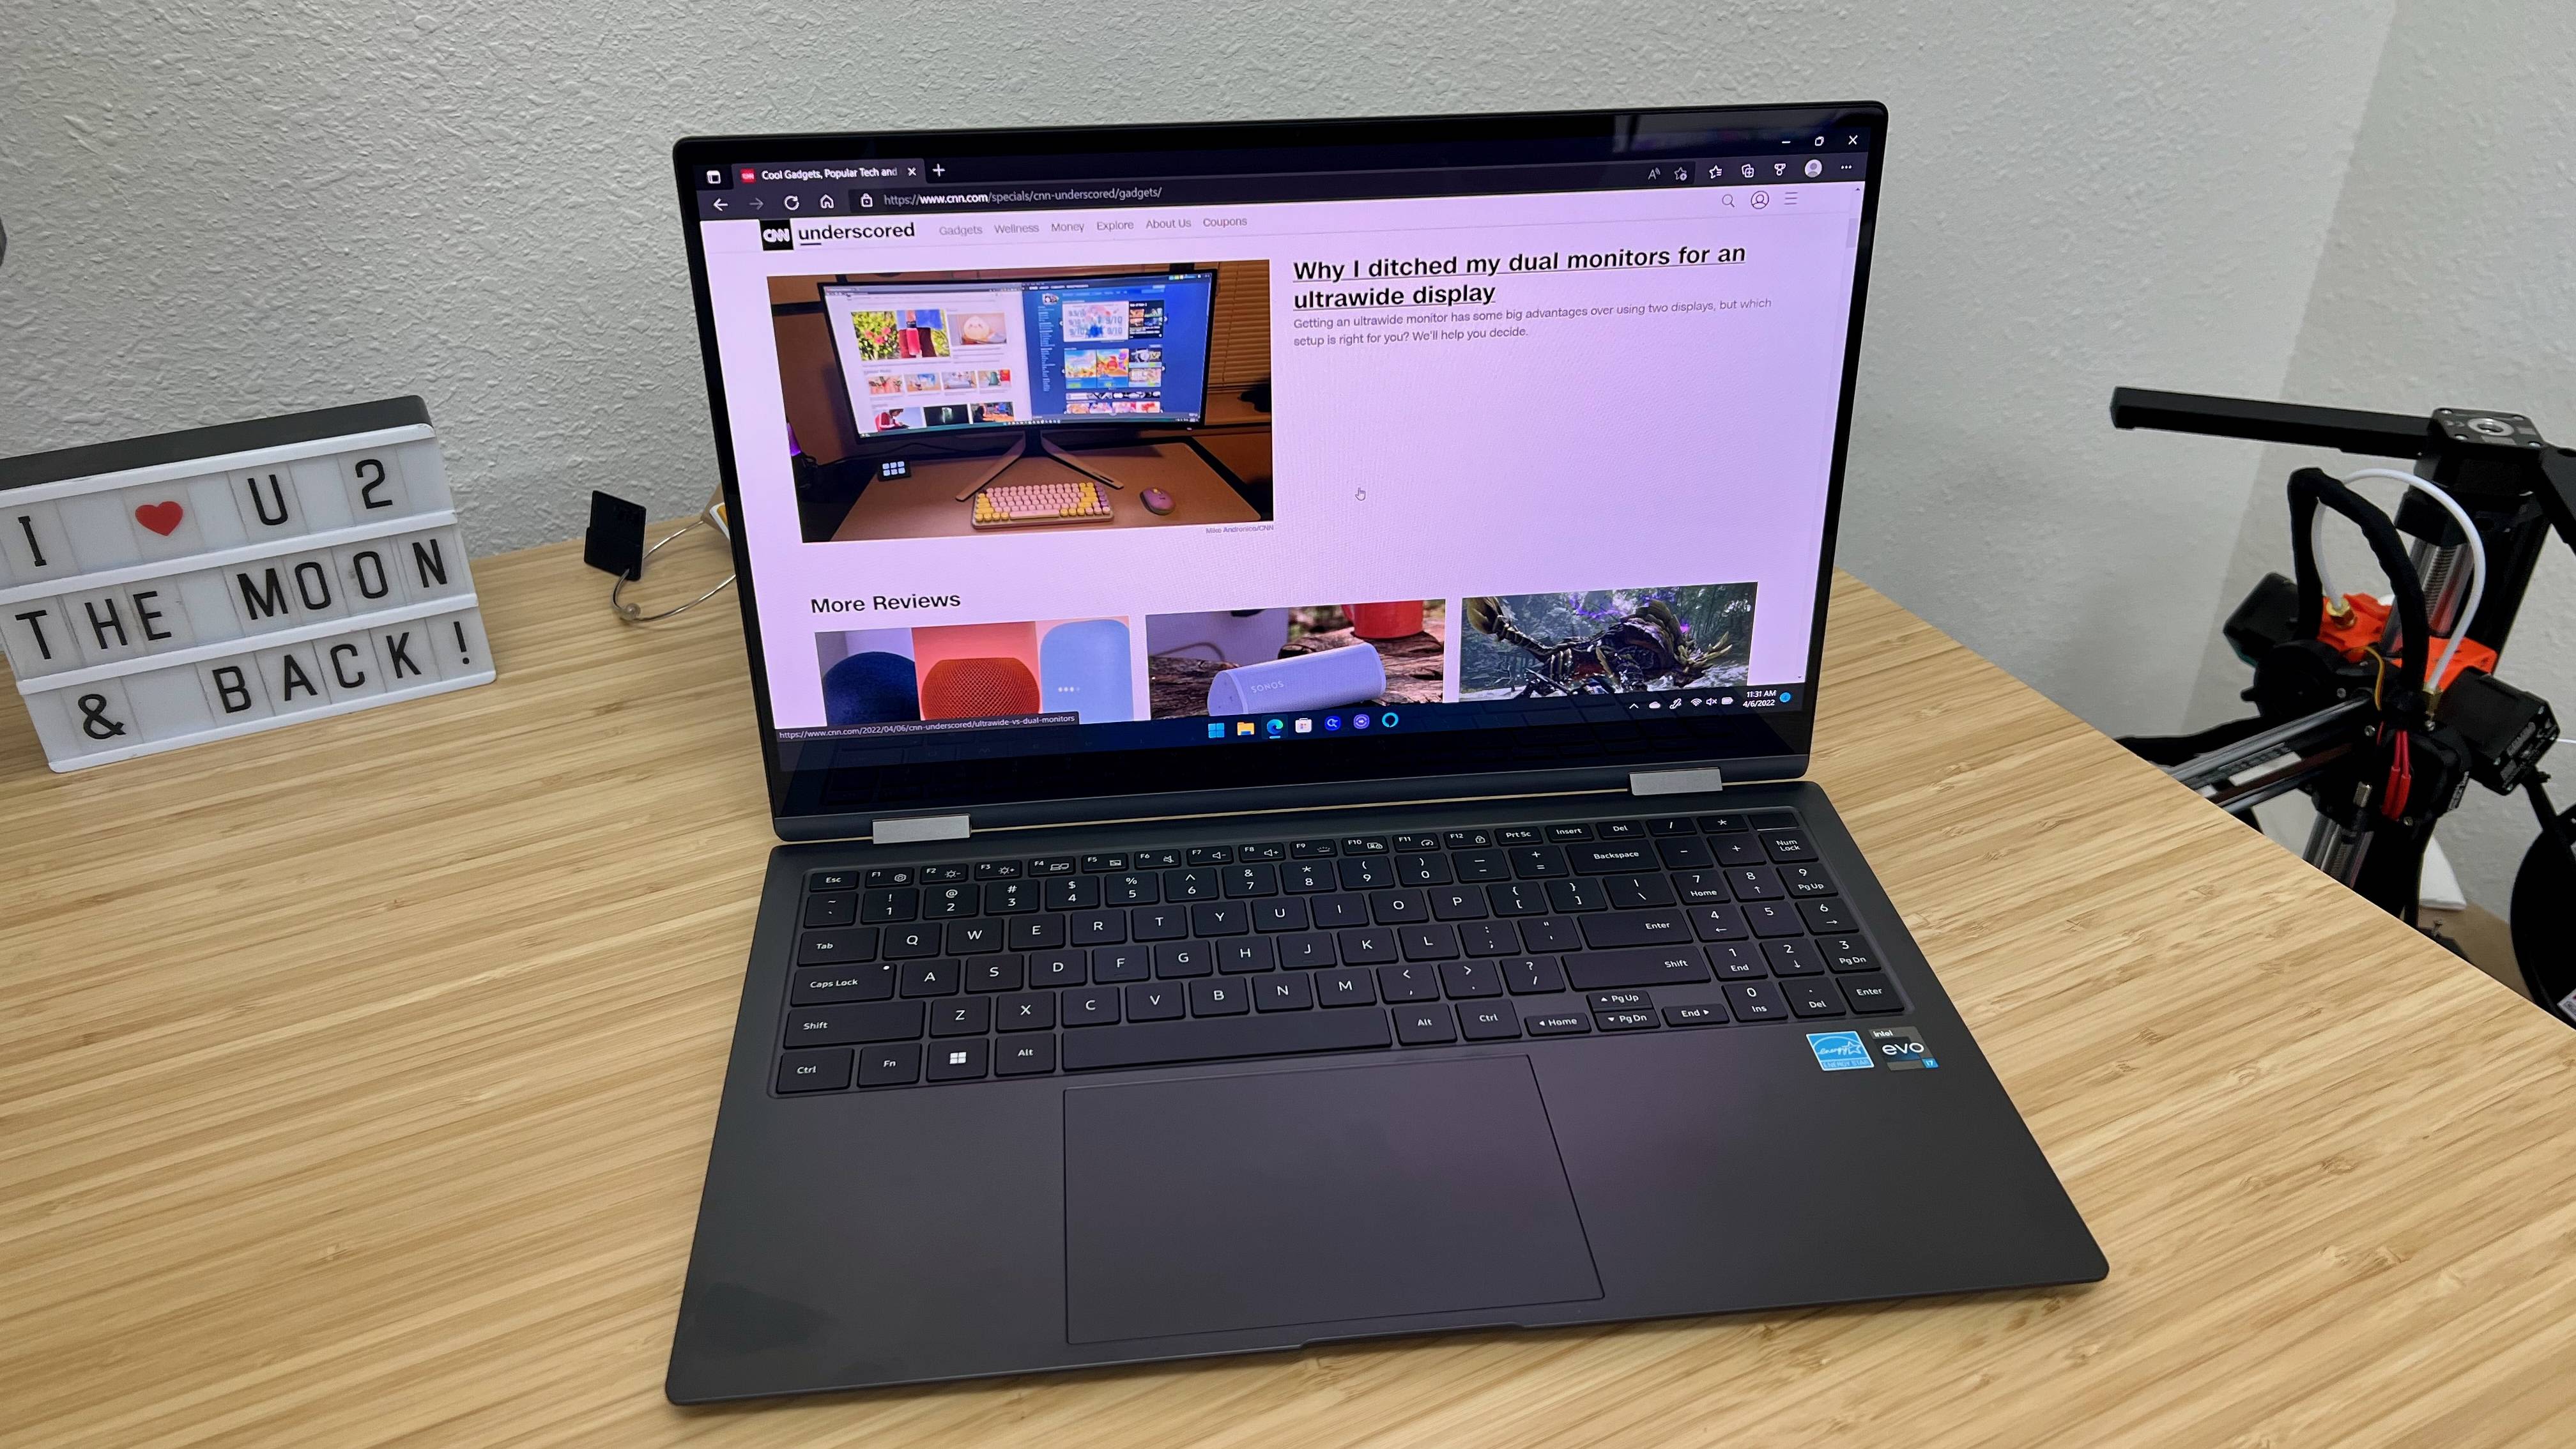 Samsung Galaxy Book Pro 360 review: A 2-in-1 that makes sense